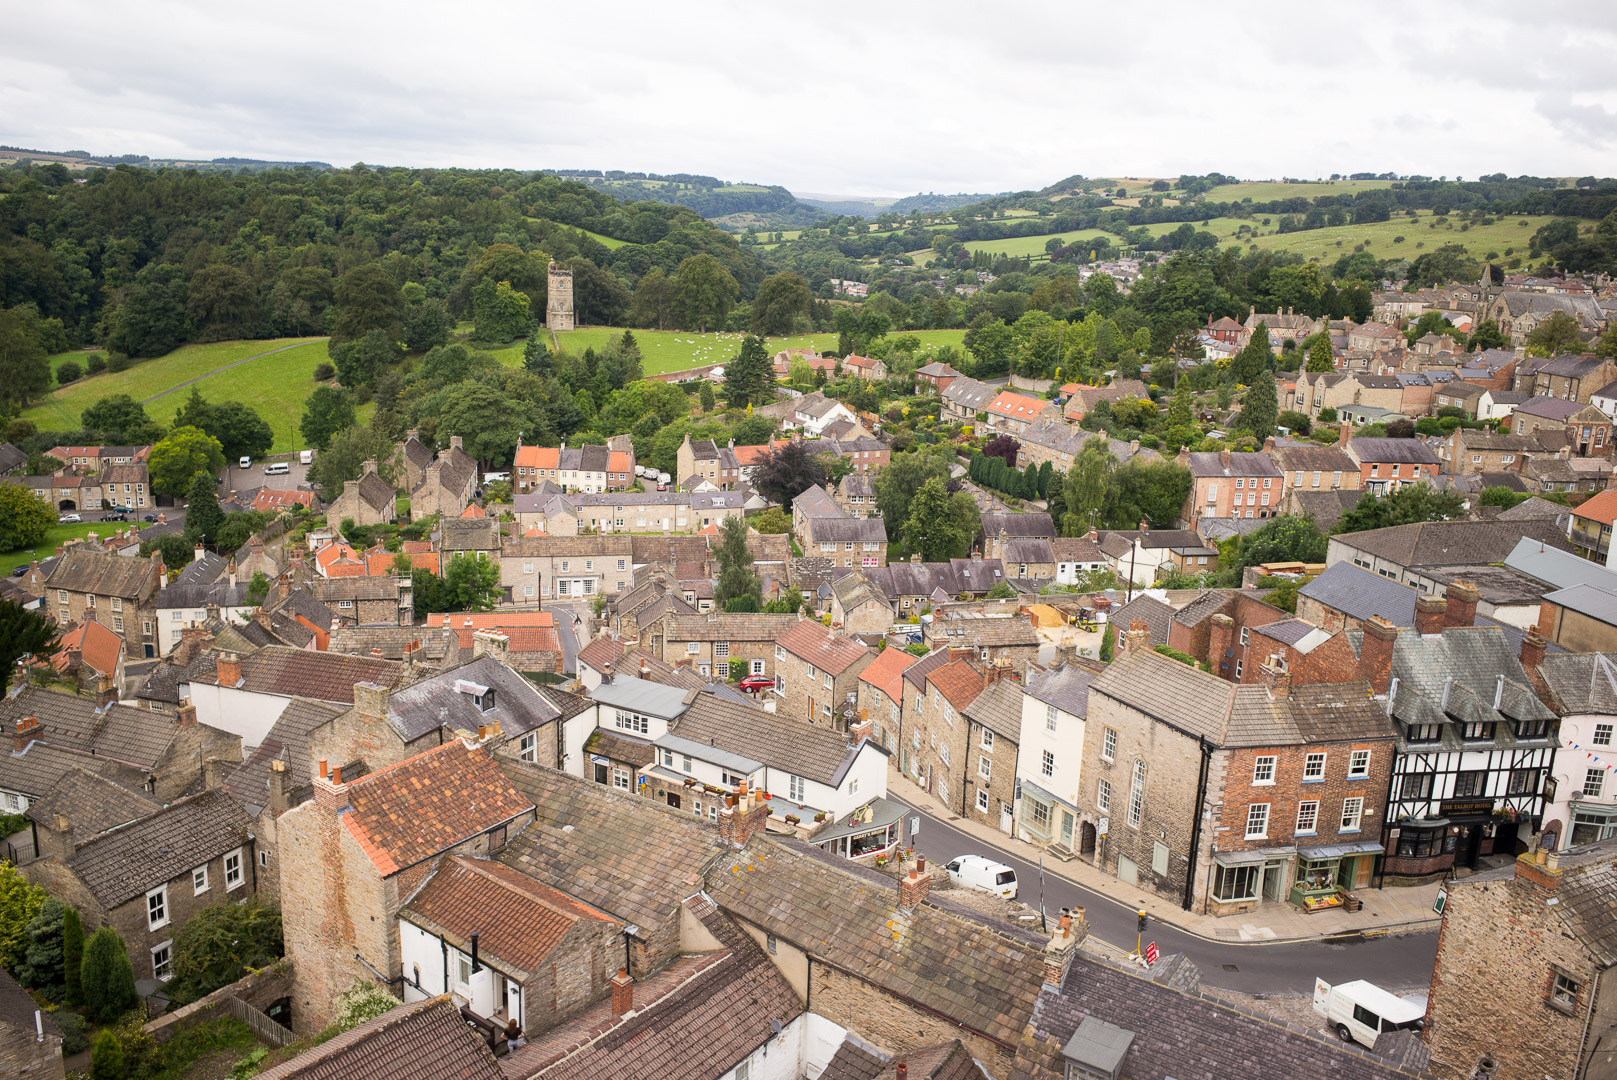 View of Richmond looking East from the Castle Keep.